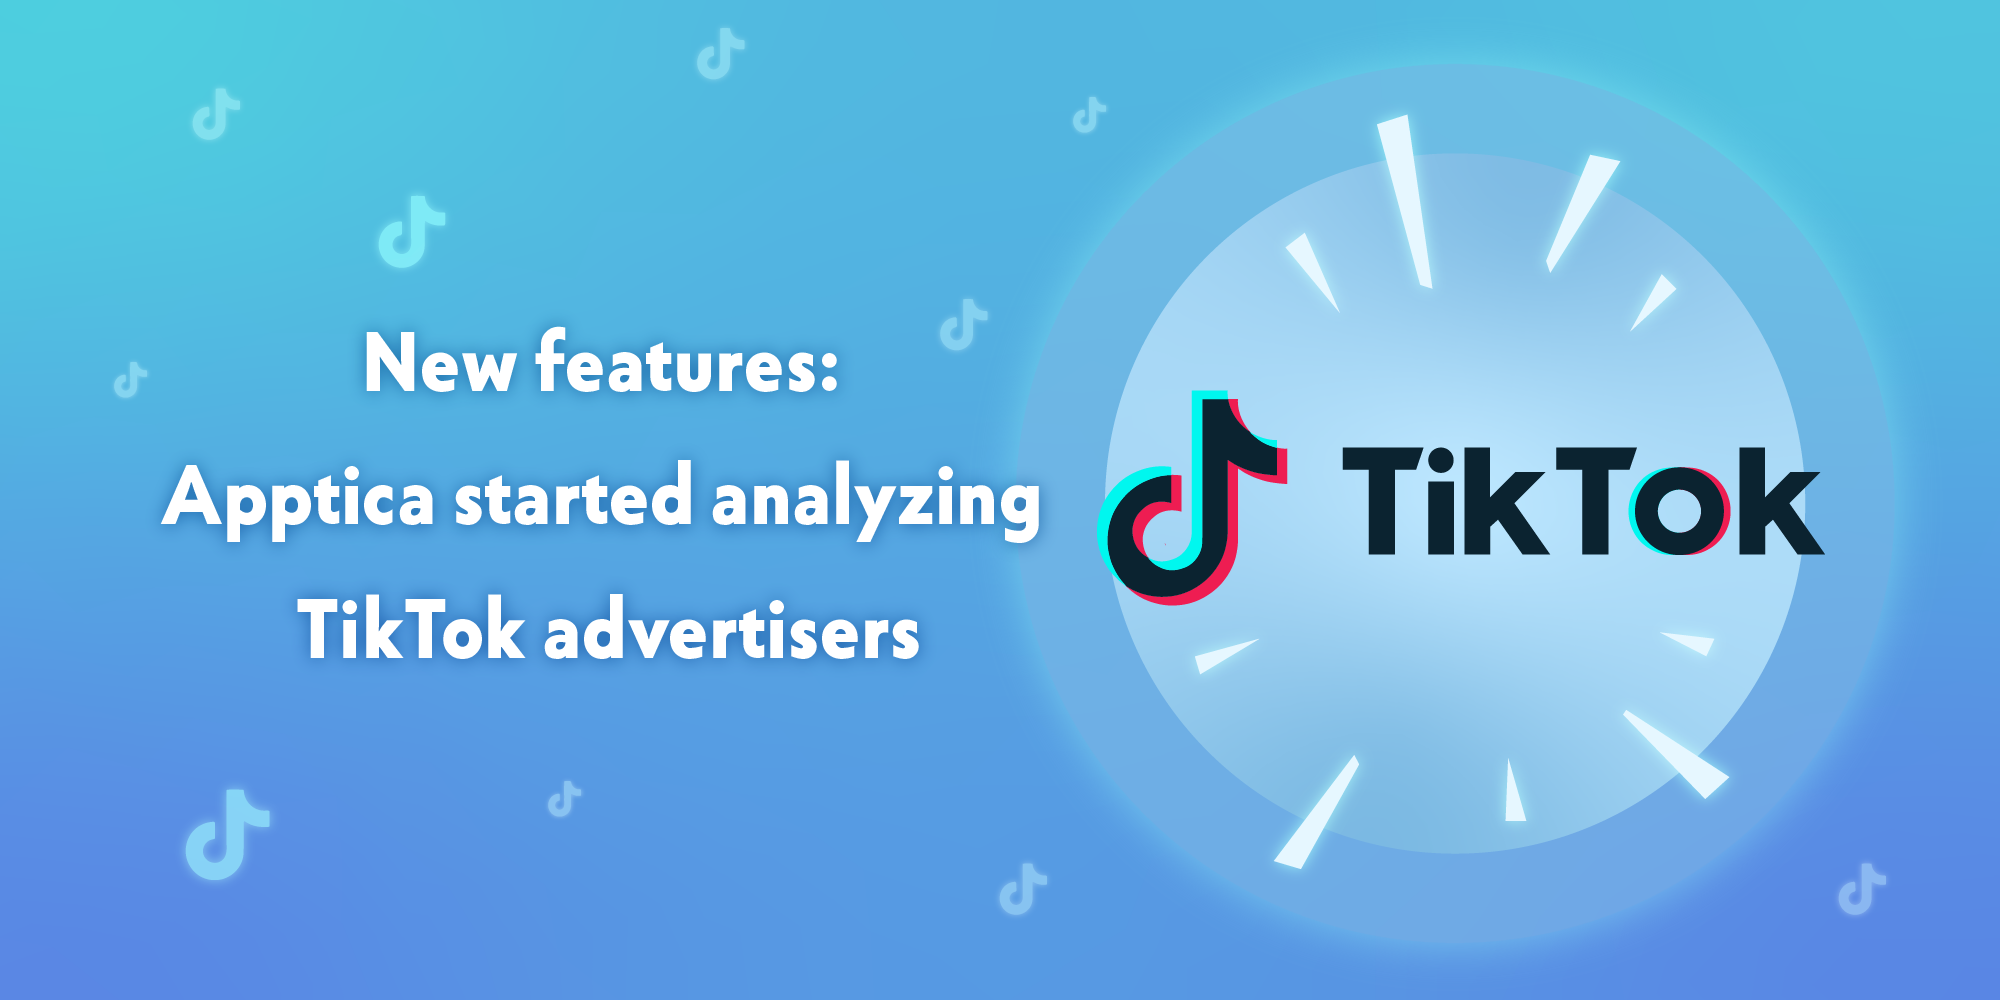 New features: Apptica started analyzing TikTok advertisers